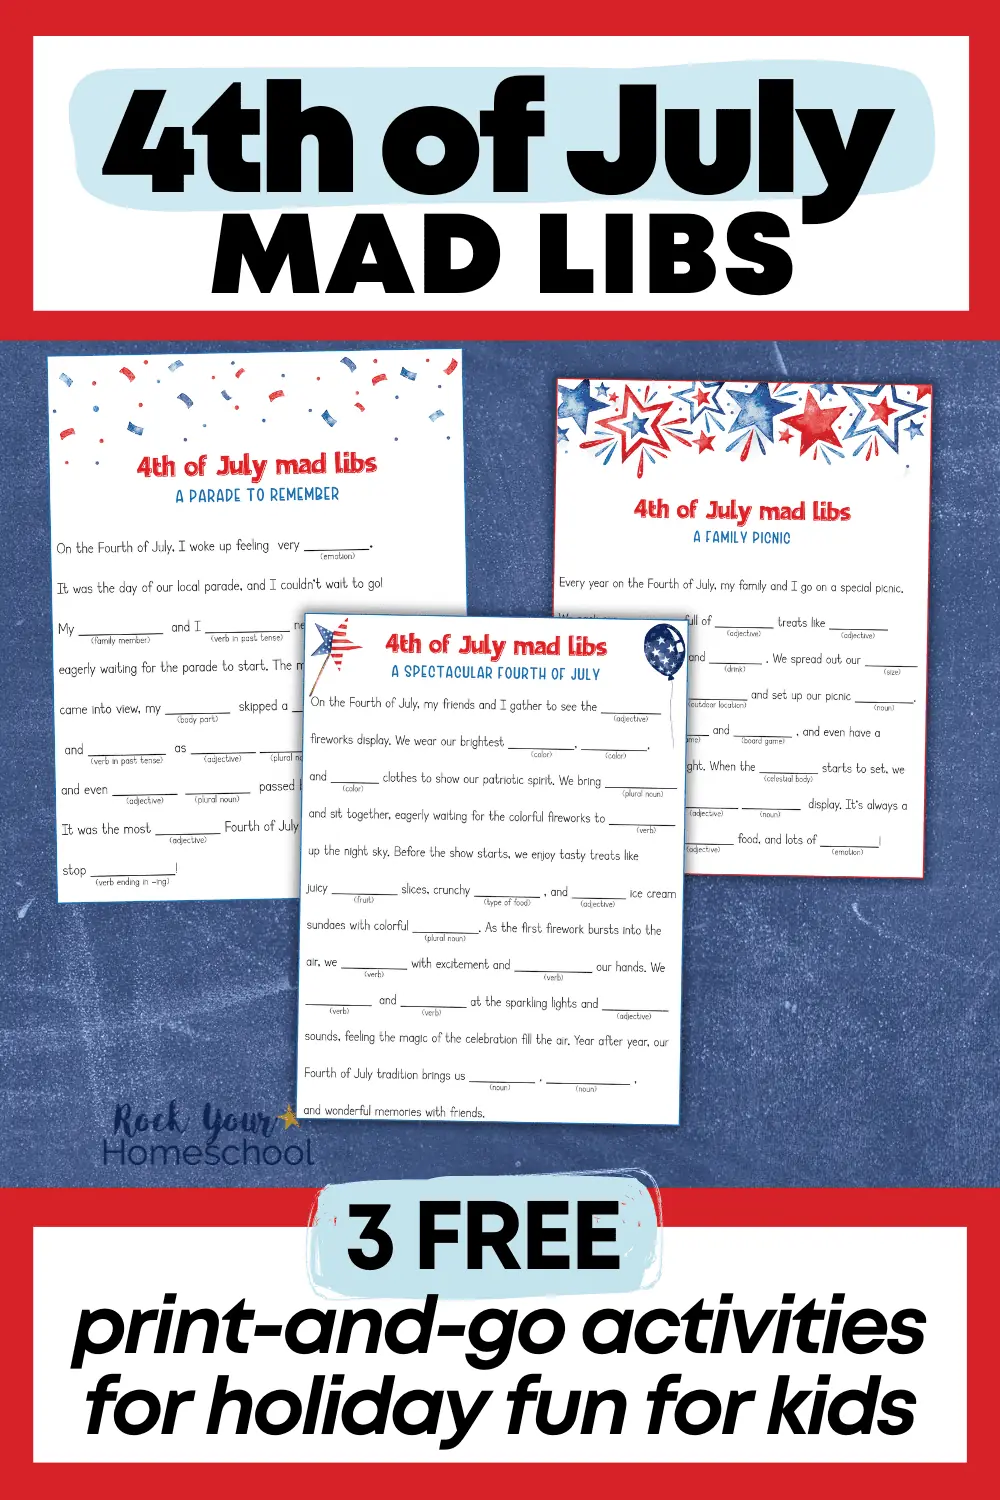 4th of July Mad Libs: Fun Ways to Celebrate the Holiday with Kids (Free)